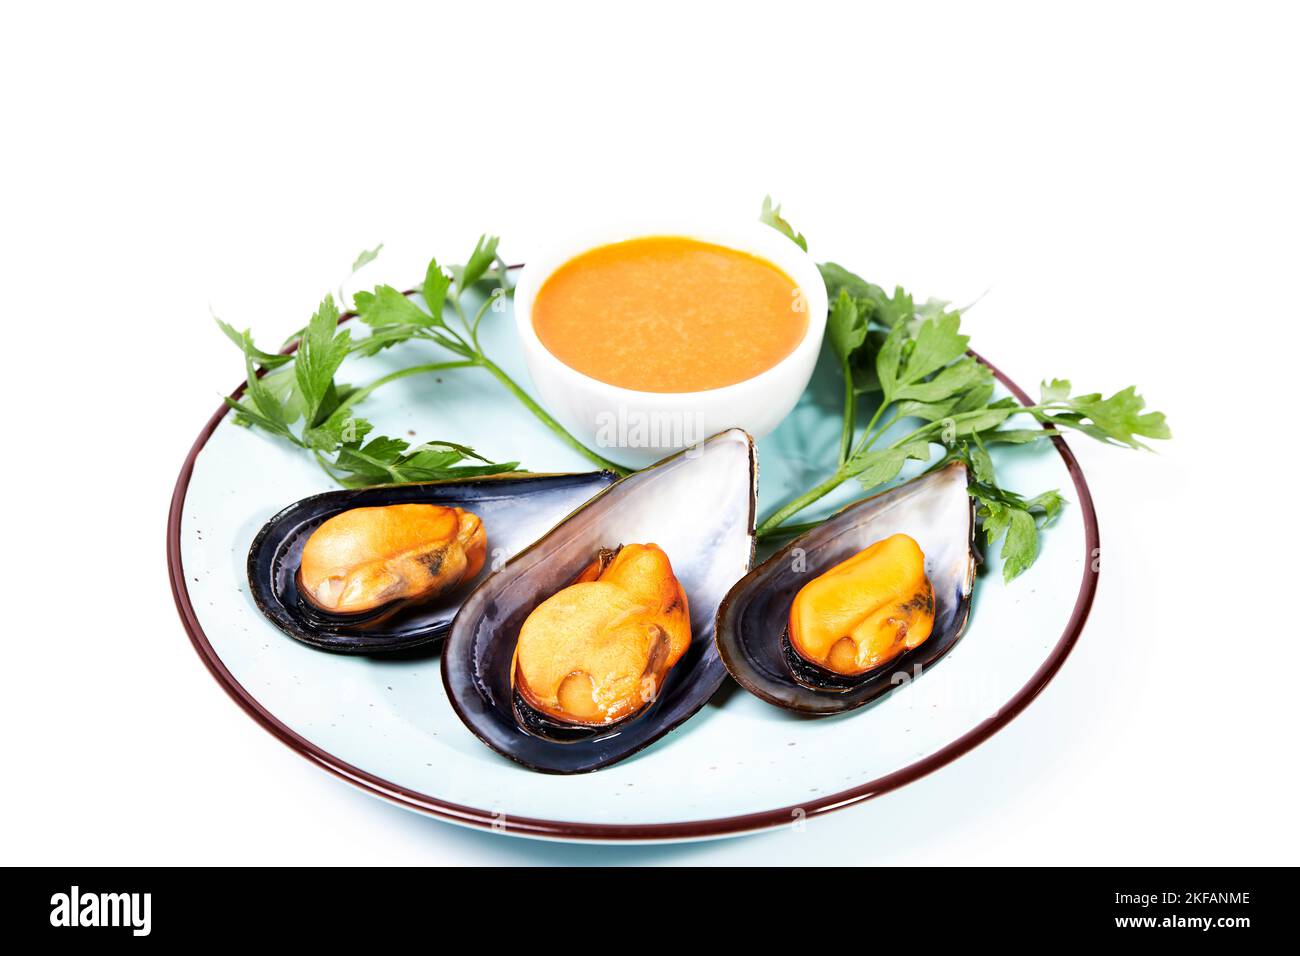 Dish with steamed mussels with parsley and a bowl of spicy sauce on a white background. Shell food. Healthy food Stock Photo